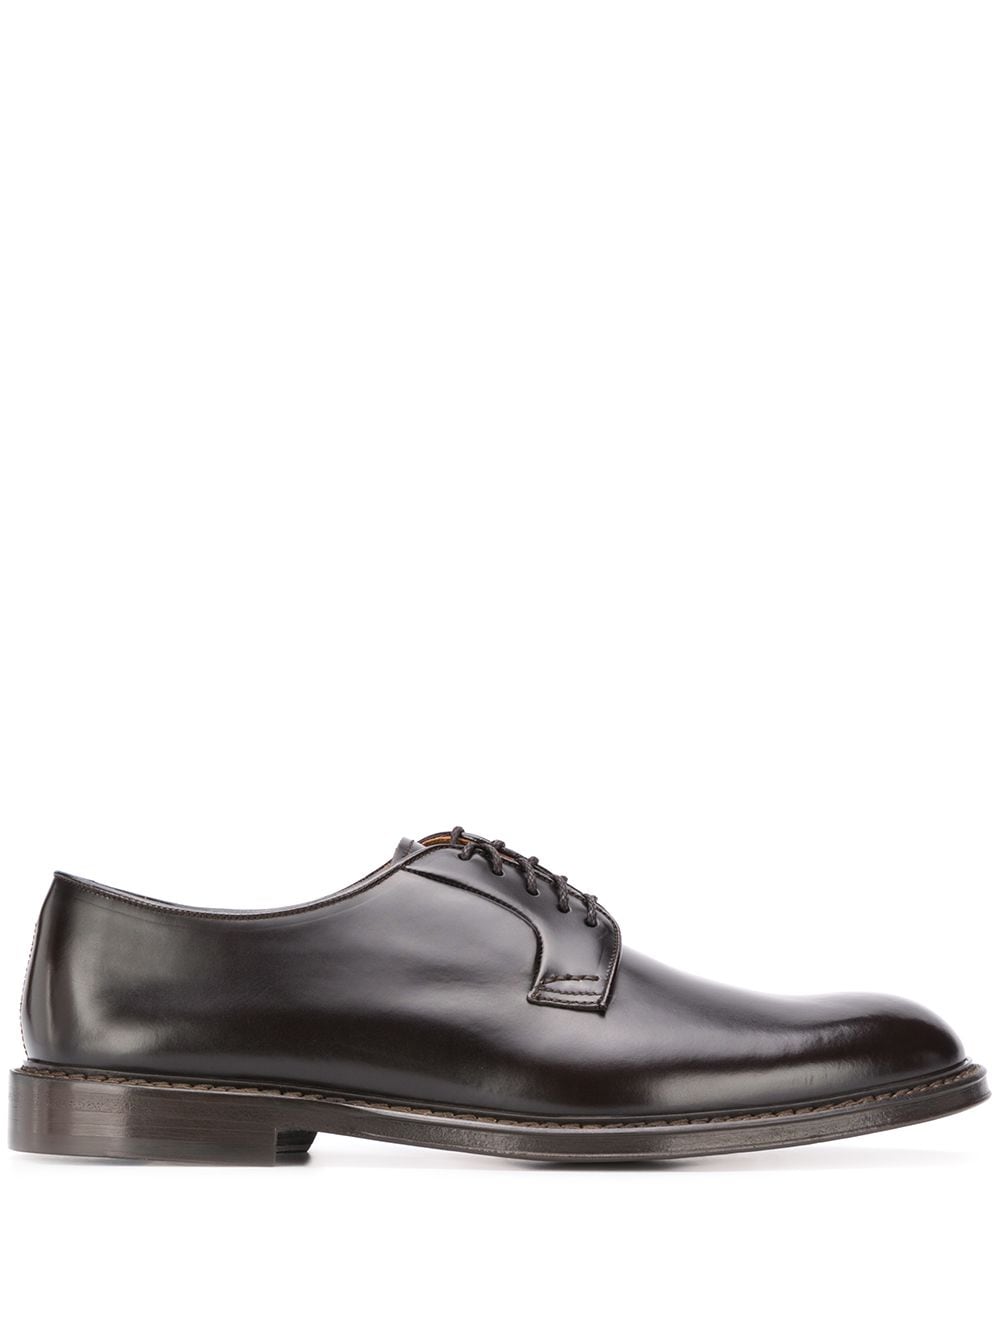 Doucal's low heel oxford shoes - Brown von Doucal's